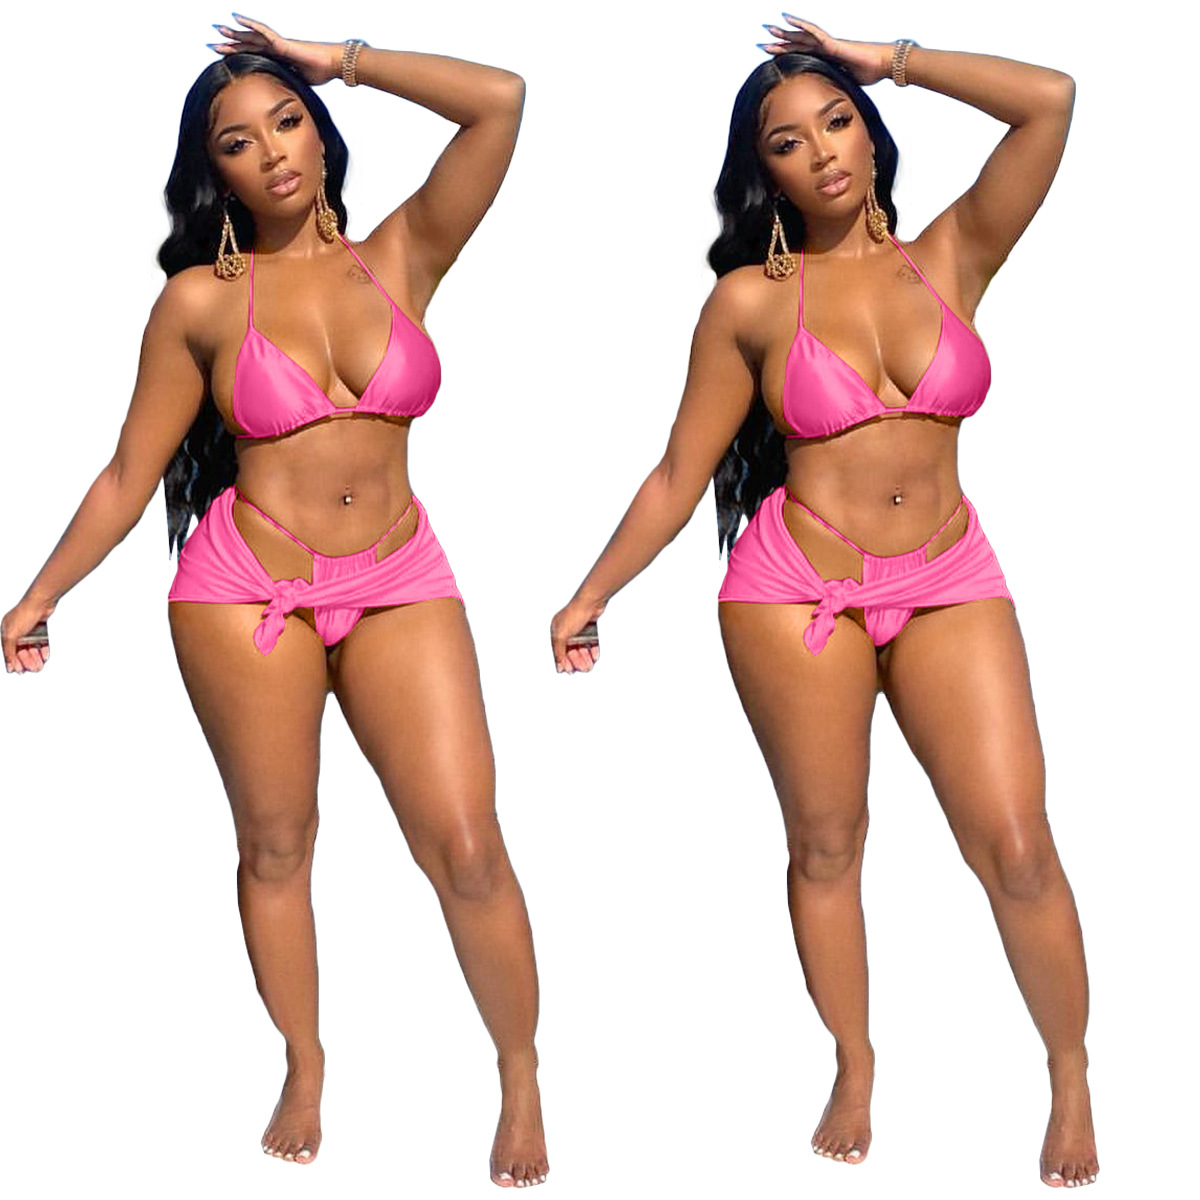 Sexy Halter Neck Push Up Bikini Set Underwire Two Piece Swimsuit For Women,  Summer Beachwear In Various Colors From Nan01, $12.02